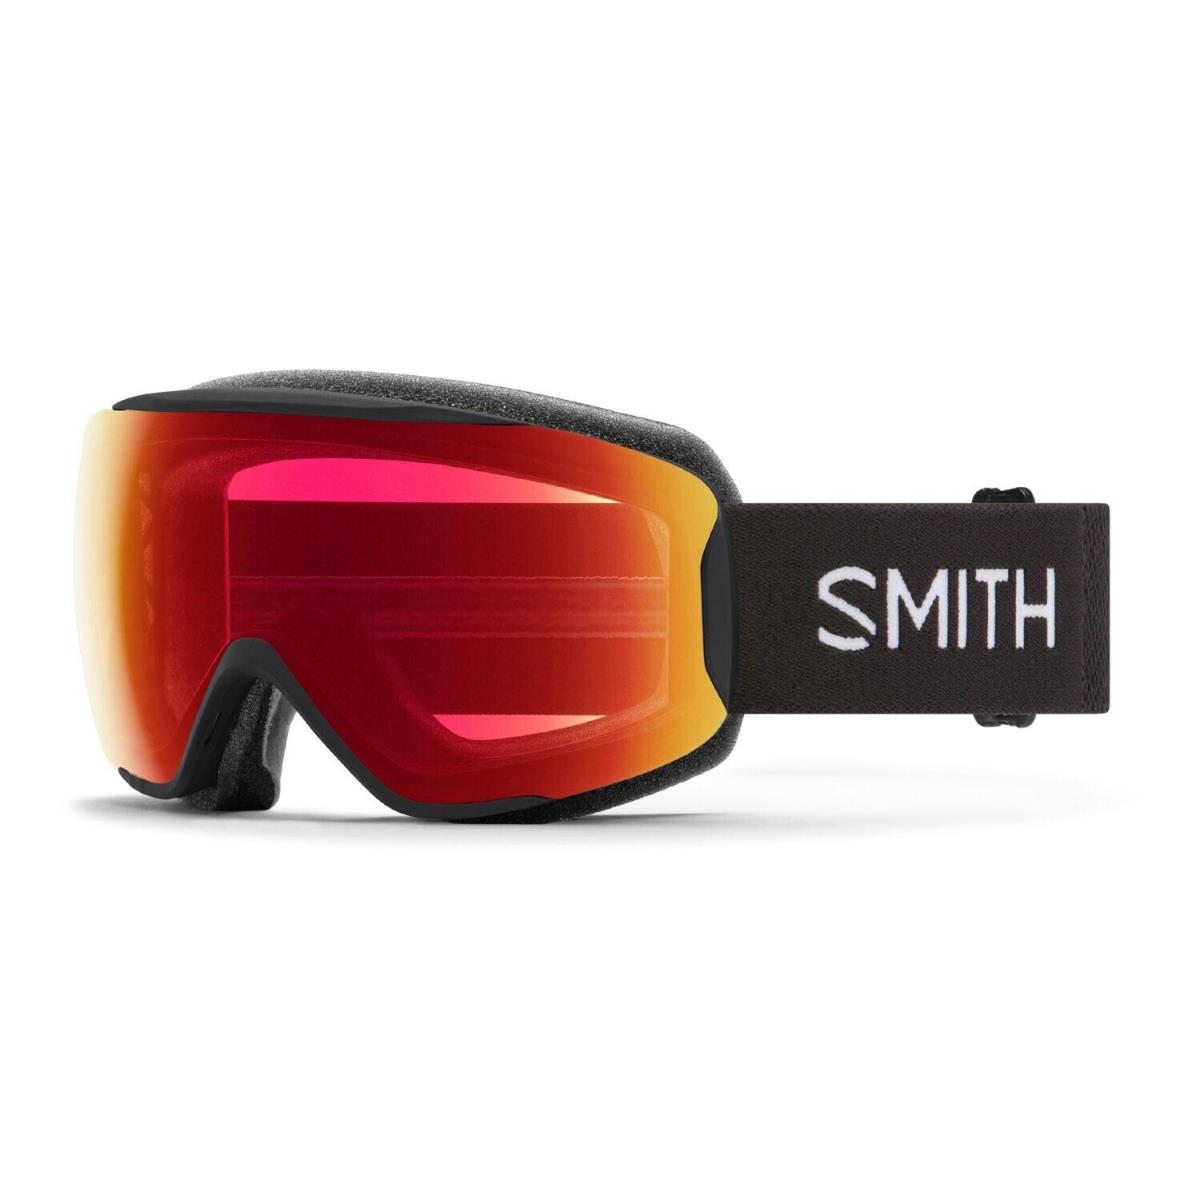 Smith Moment Snow Goggles Black Frame Photochromic Red Mirror Lens